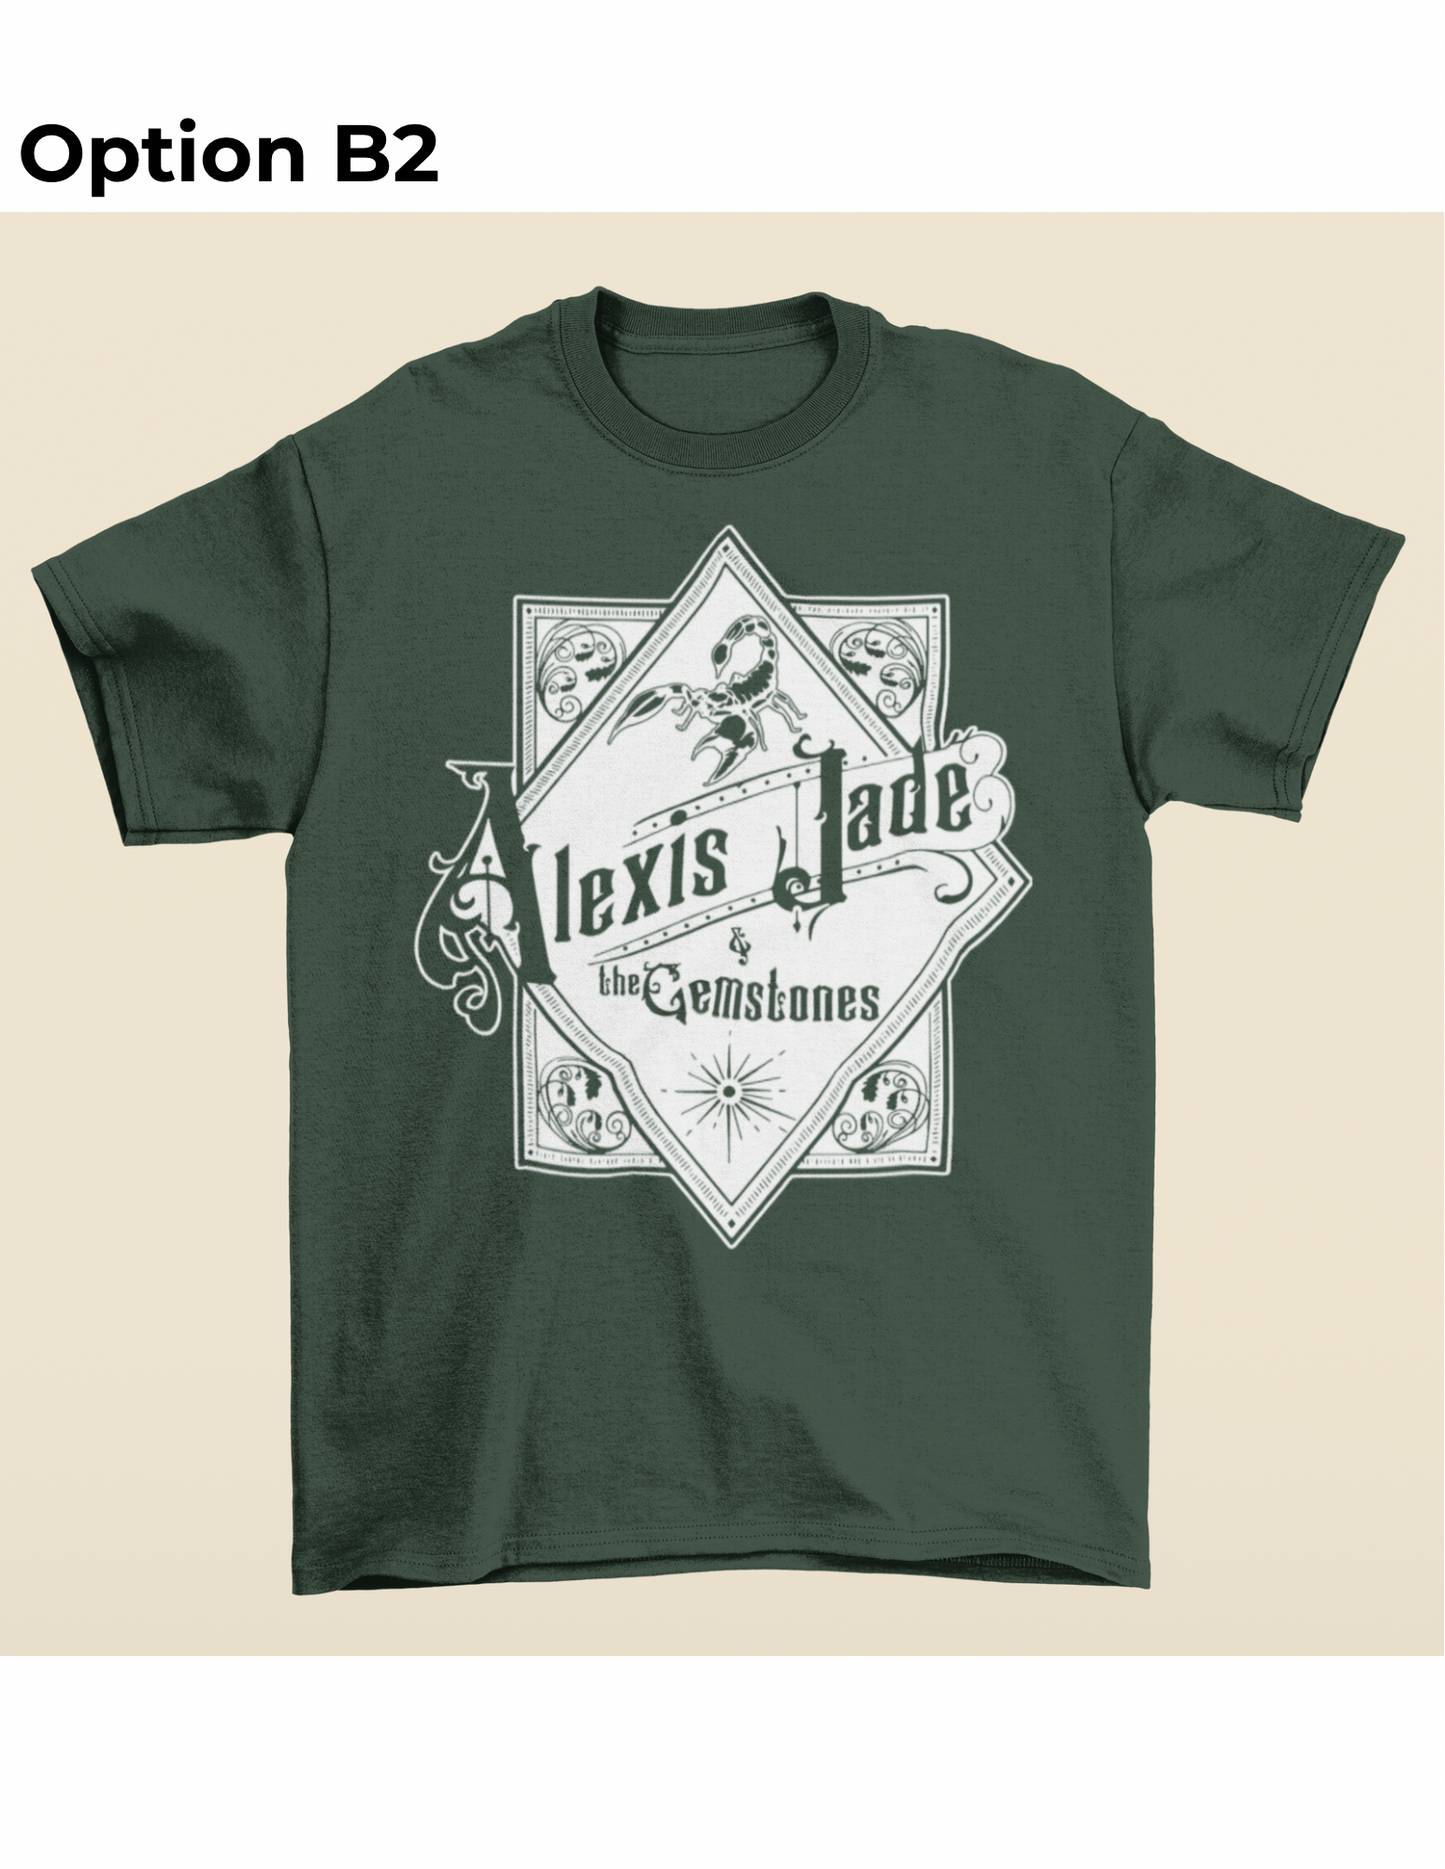 Alexis Jade & The Gemstones Official Band T-shirt